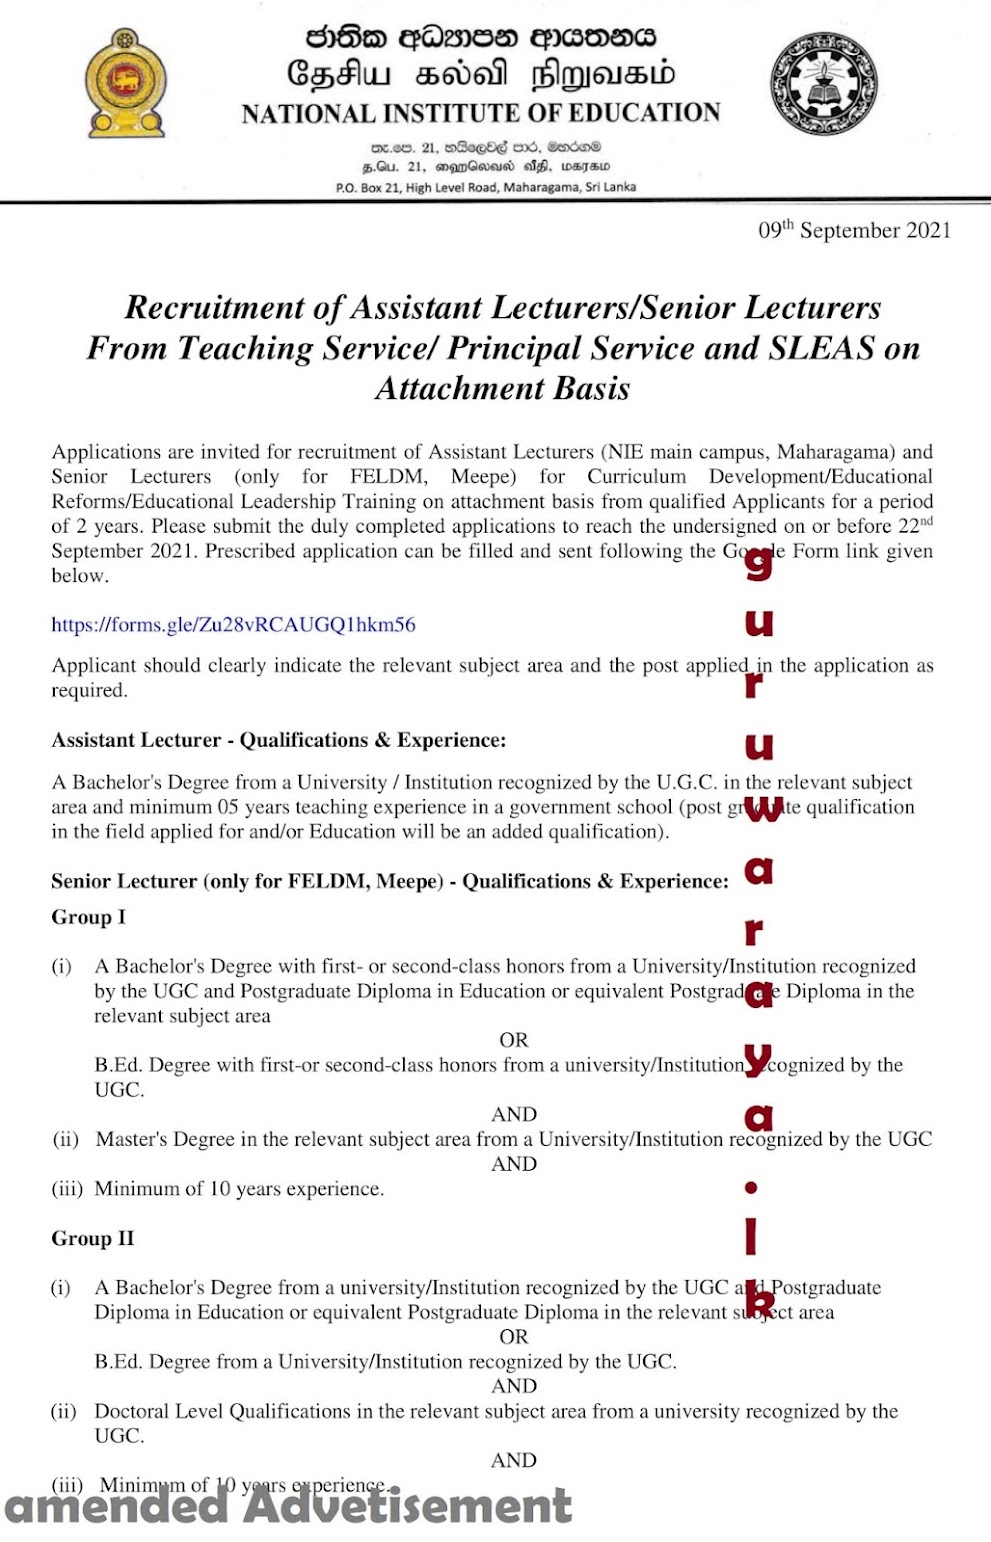 Lecturers Vacancies - NIE (FROM SLPS | SLTS | SLEAS)